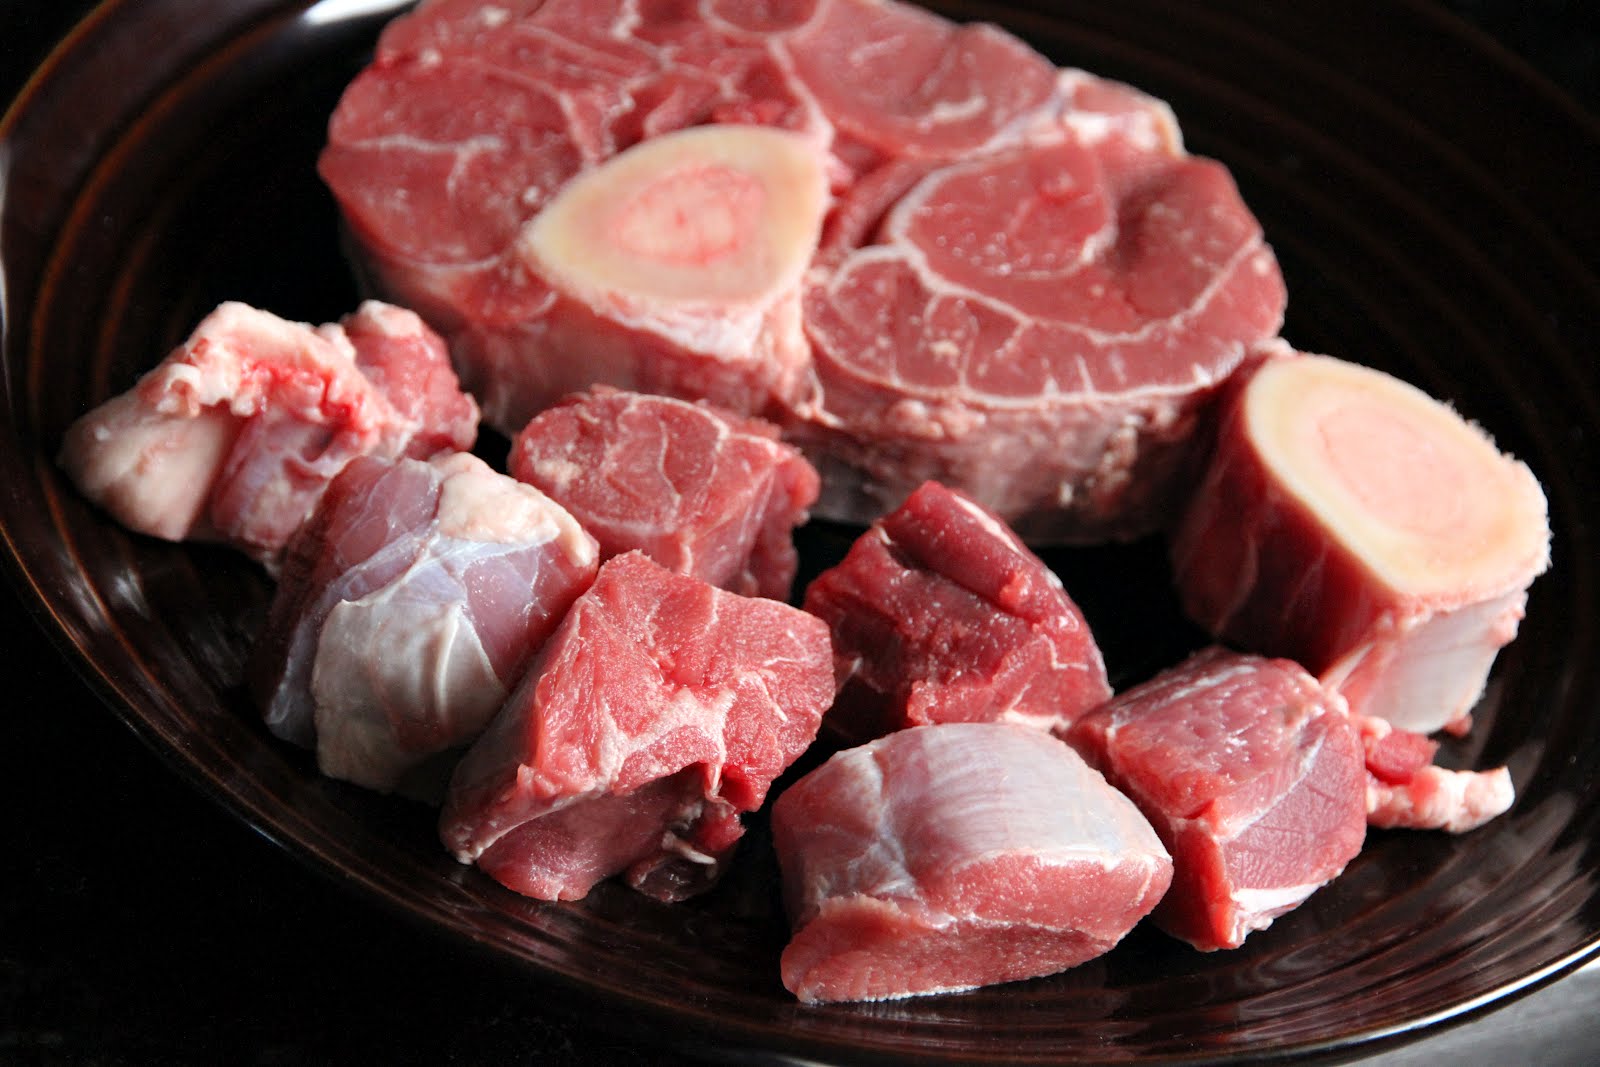 Beef cuts accounted for 86 per cent (86,000 tonnes) of exports last year